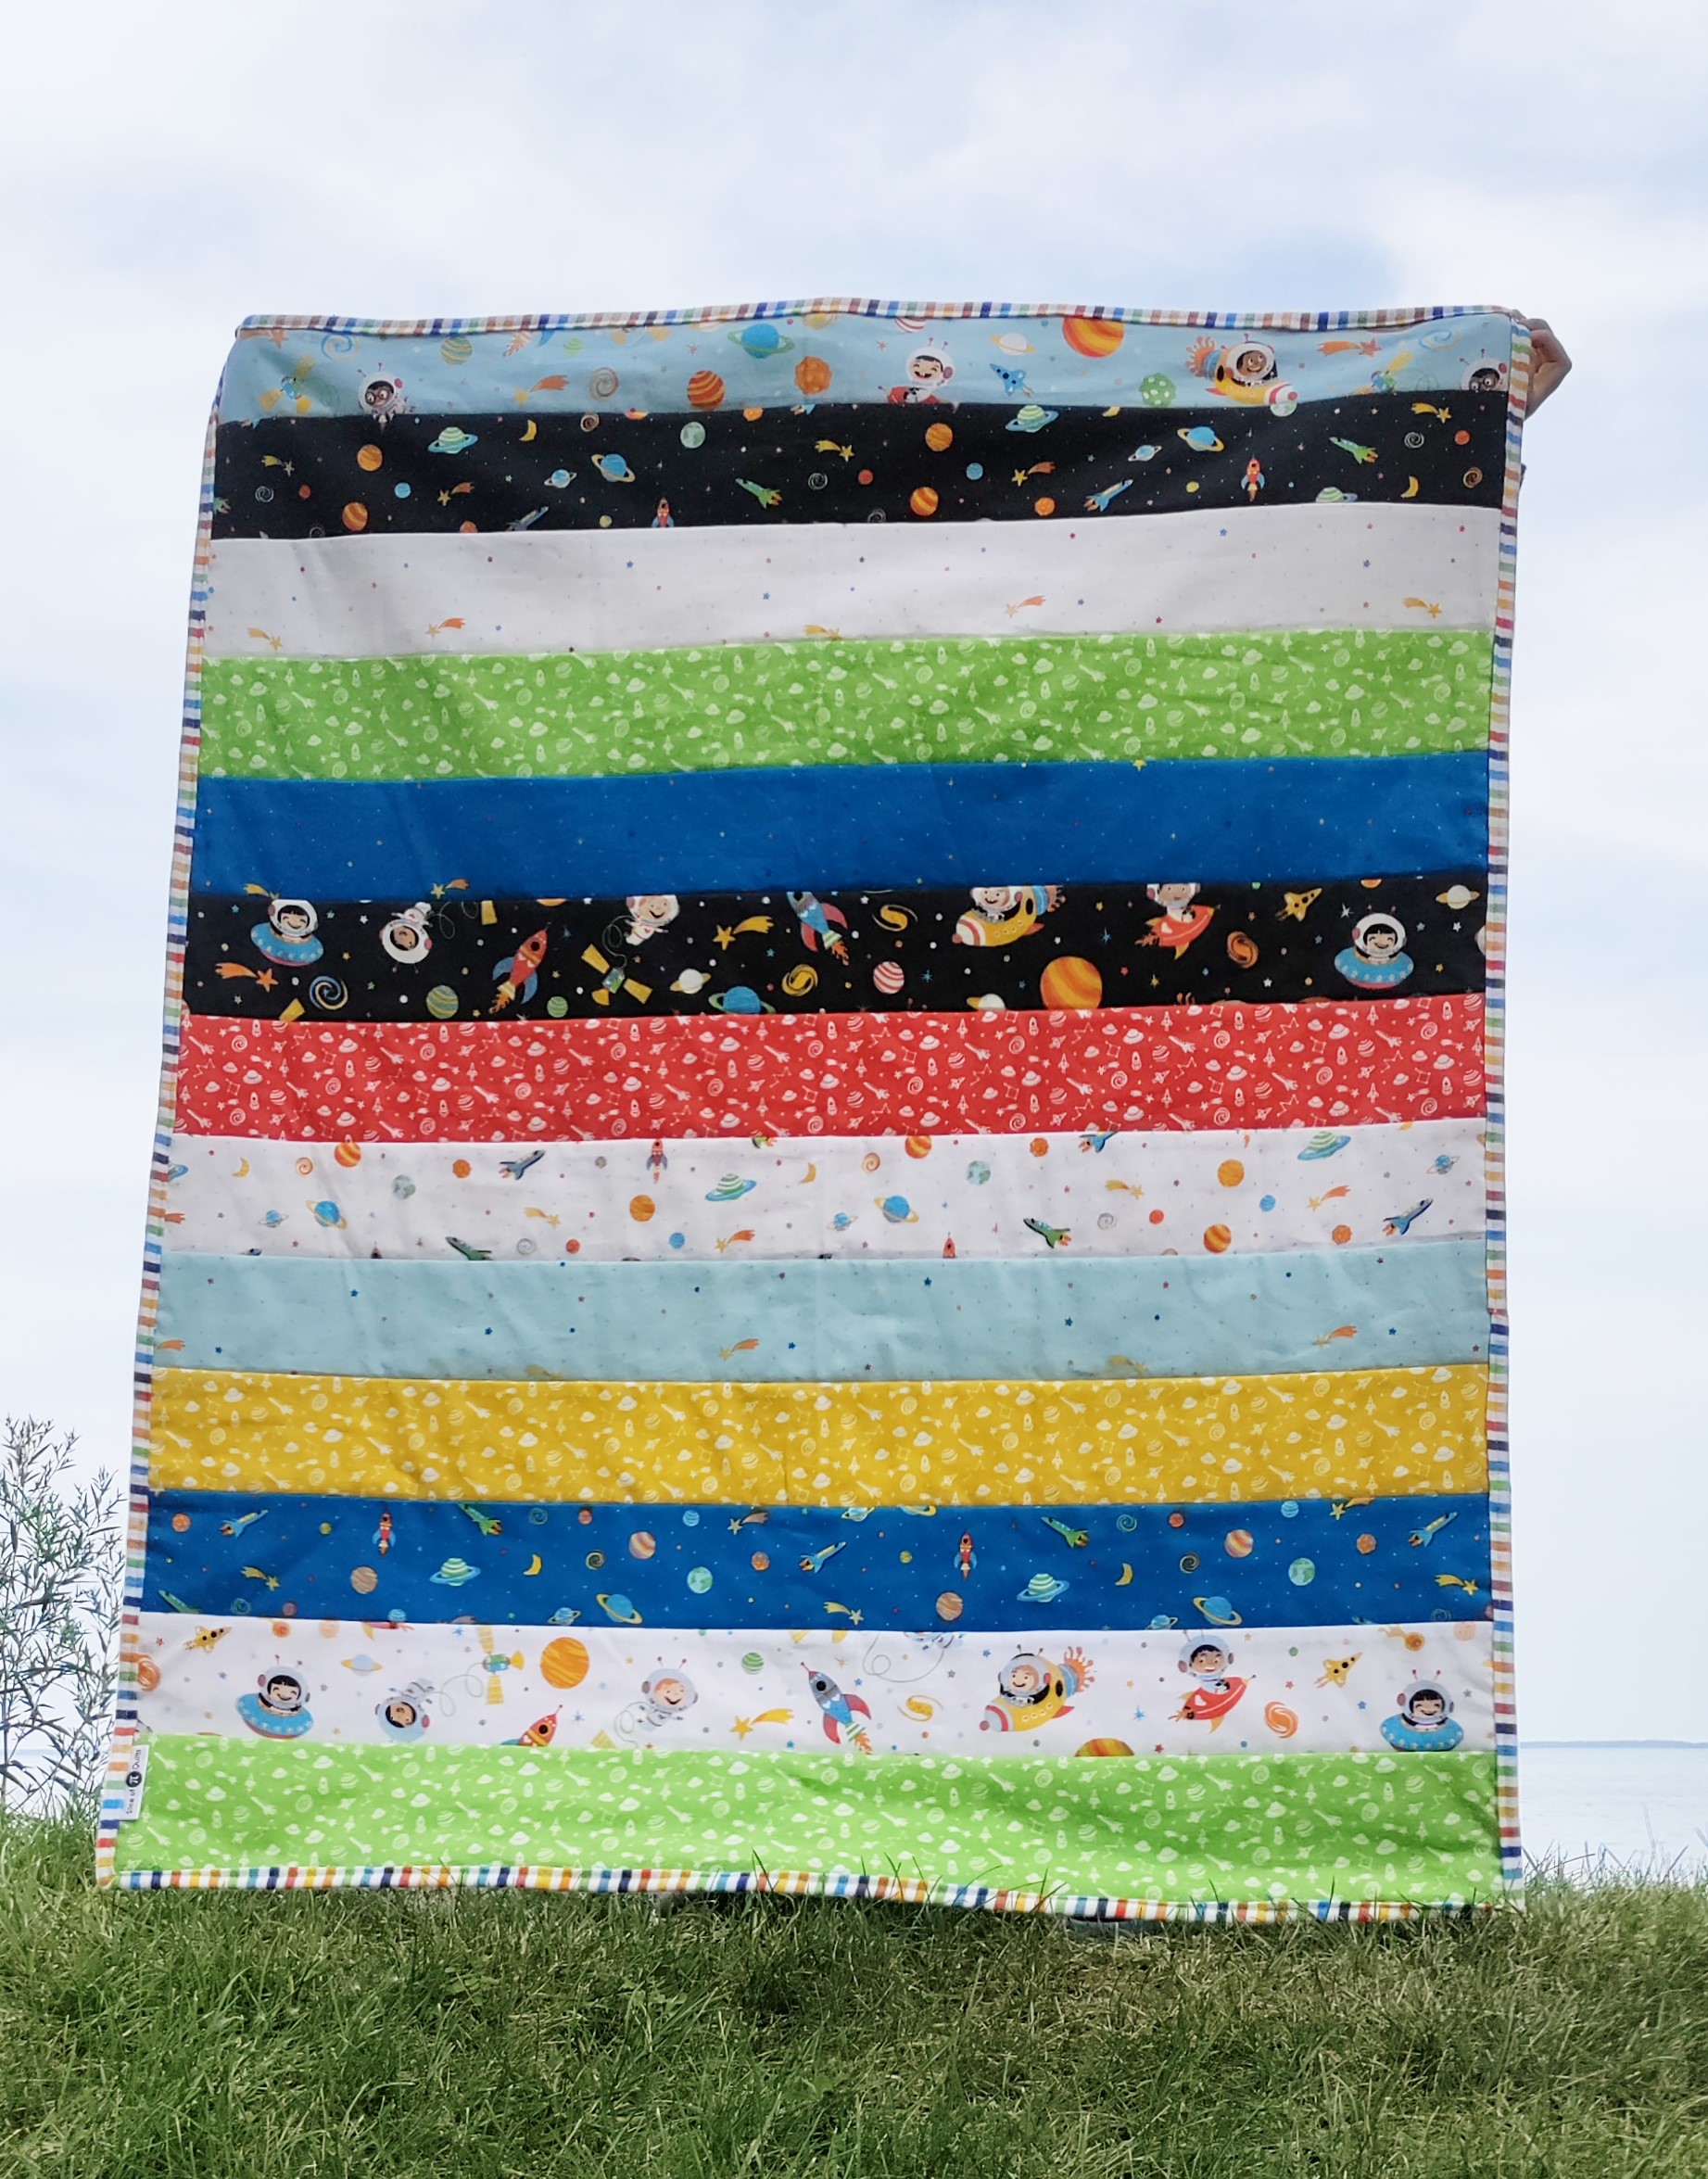 A quilt made from wide fabric strips being held up by a young boy against a light colored sky